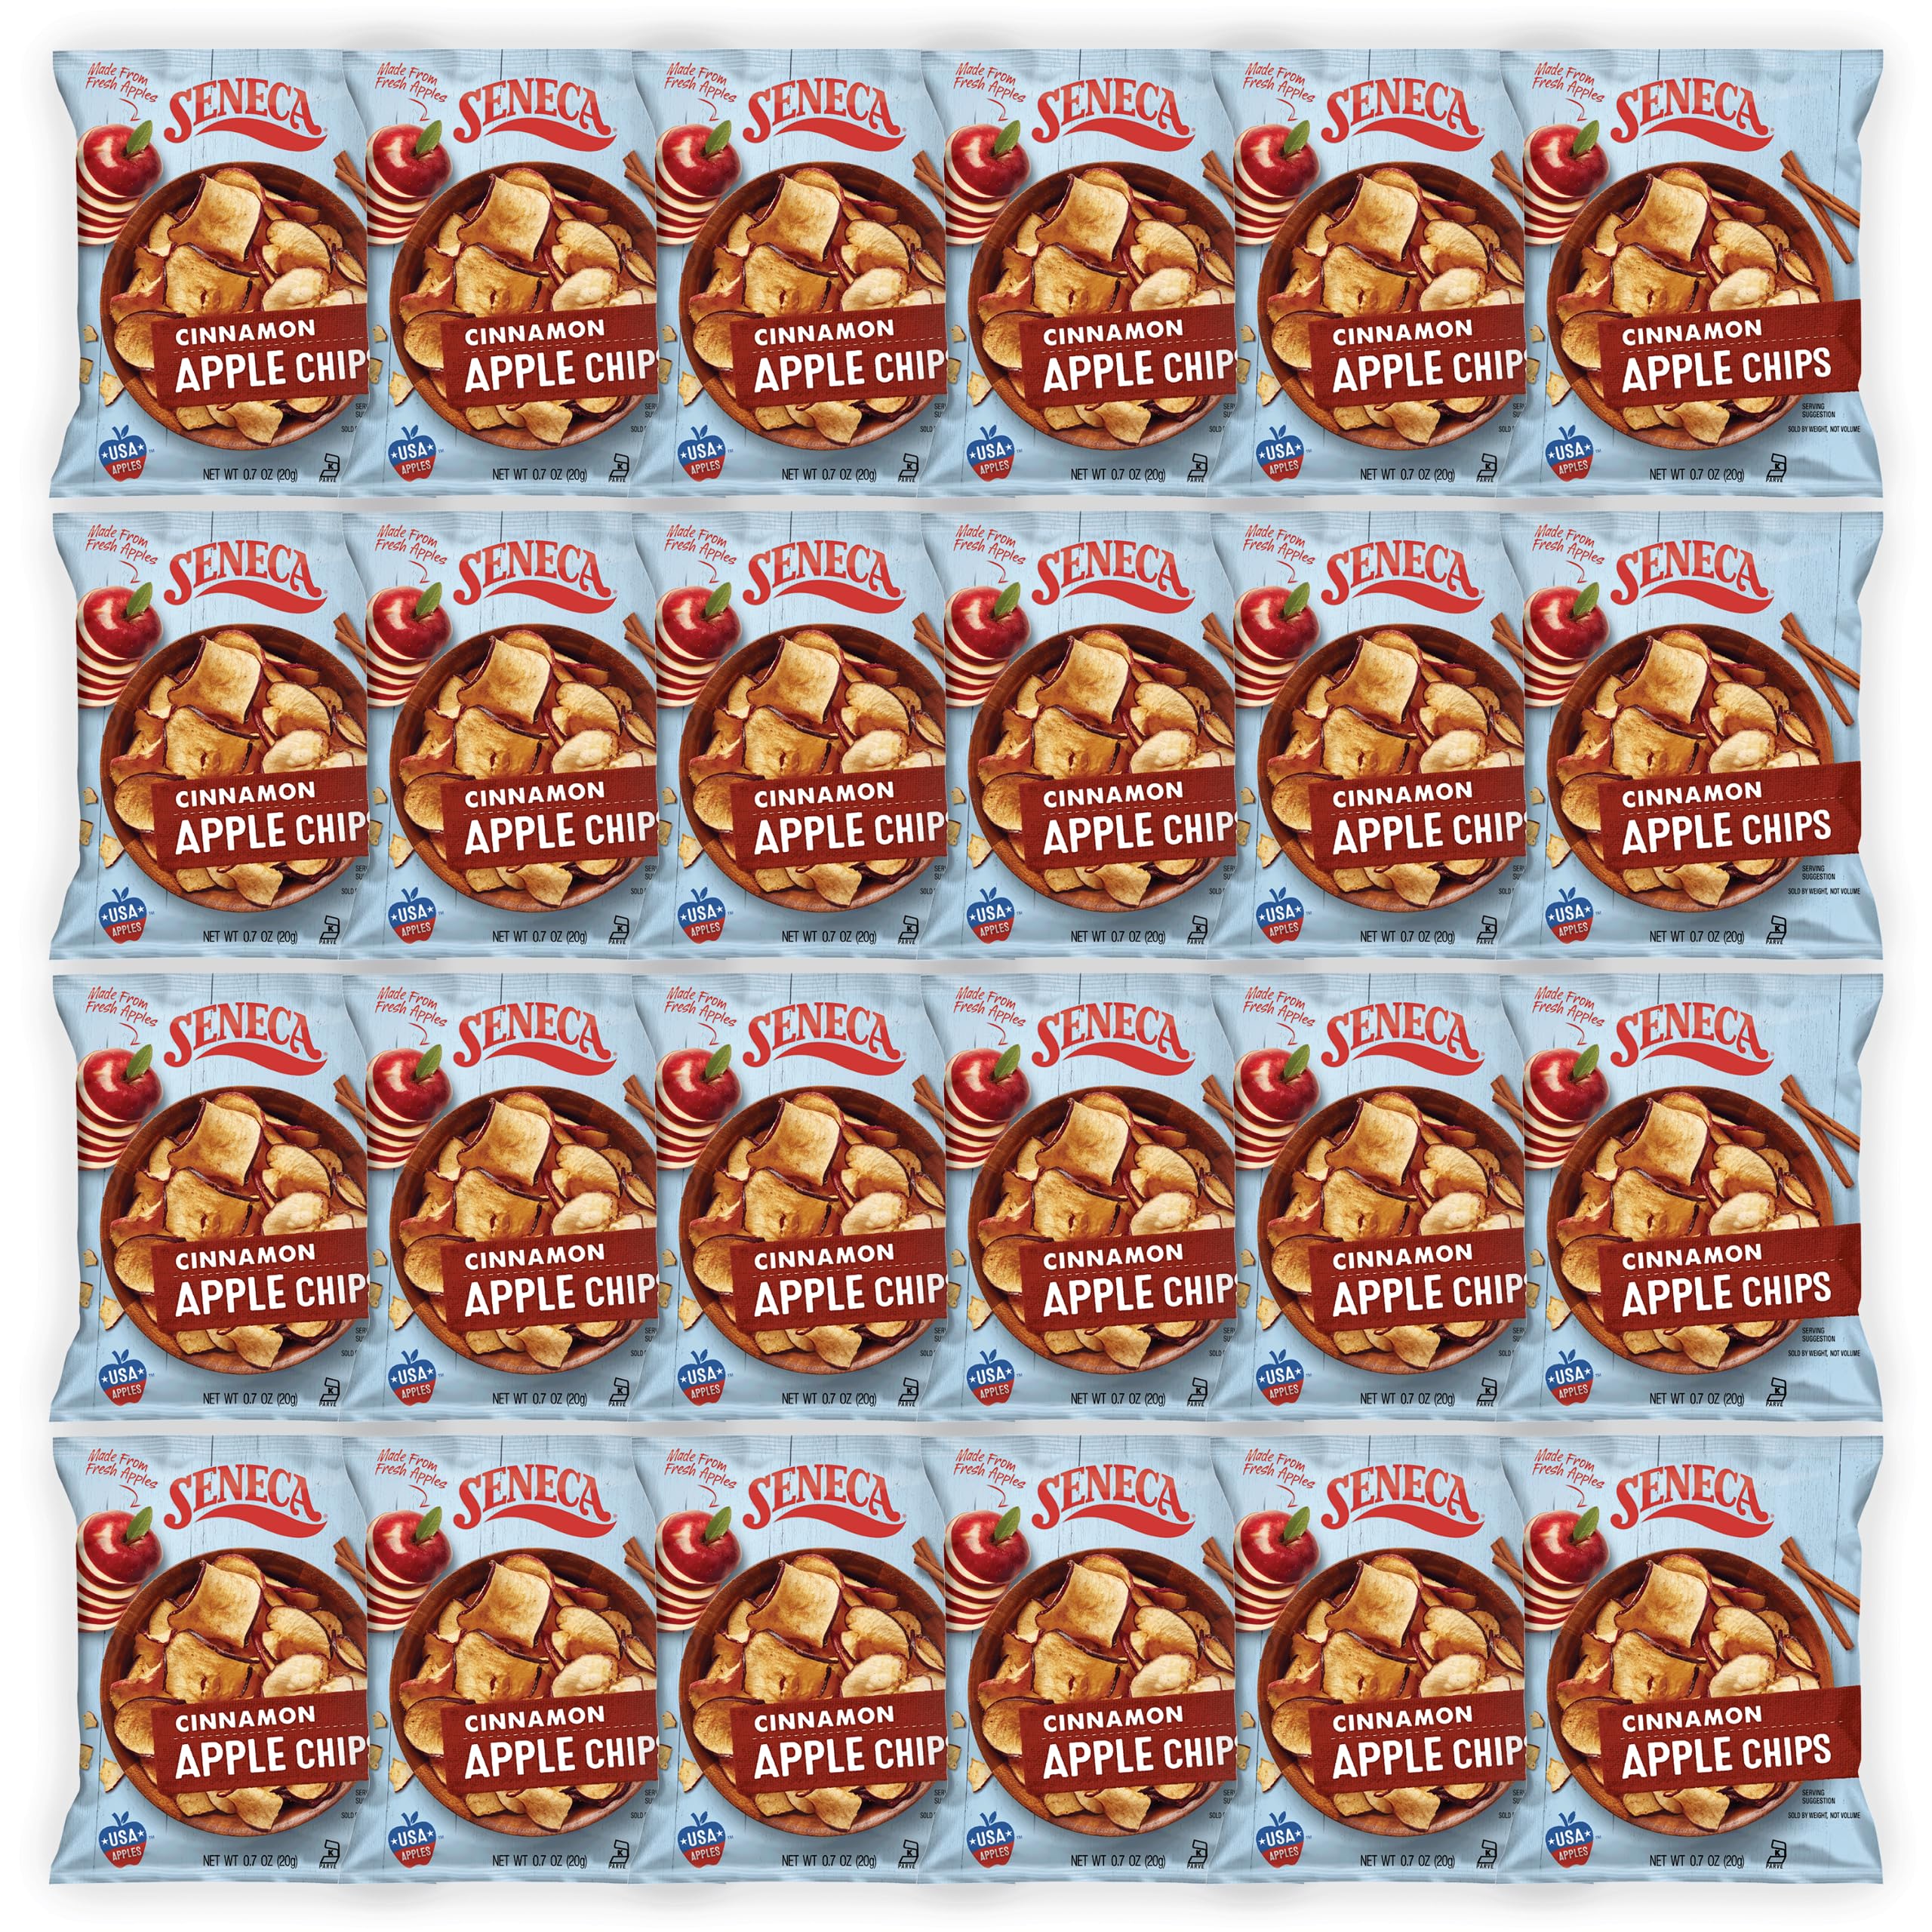 Seneca Cinnamon Apple Chips | Made from Fresh Apples | 100% Red Delicious Apples | Yakima Valley Orchards | Real Cinnamon | Crisped Apple Perfection | Foil Fresh Bag | 0.7 ounce (Pack of 24)